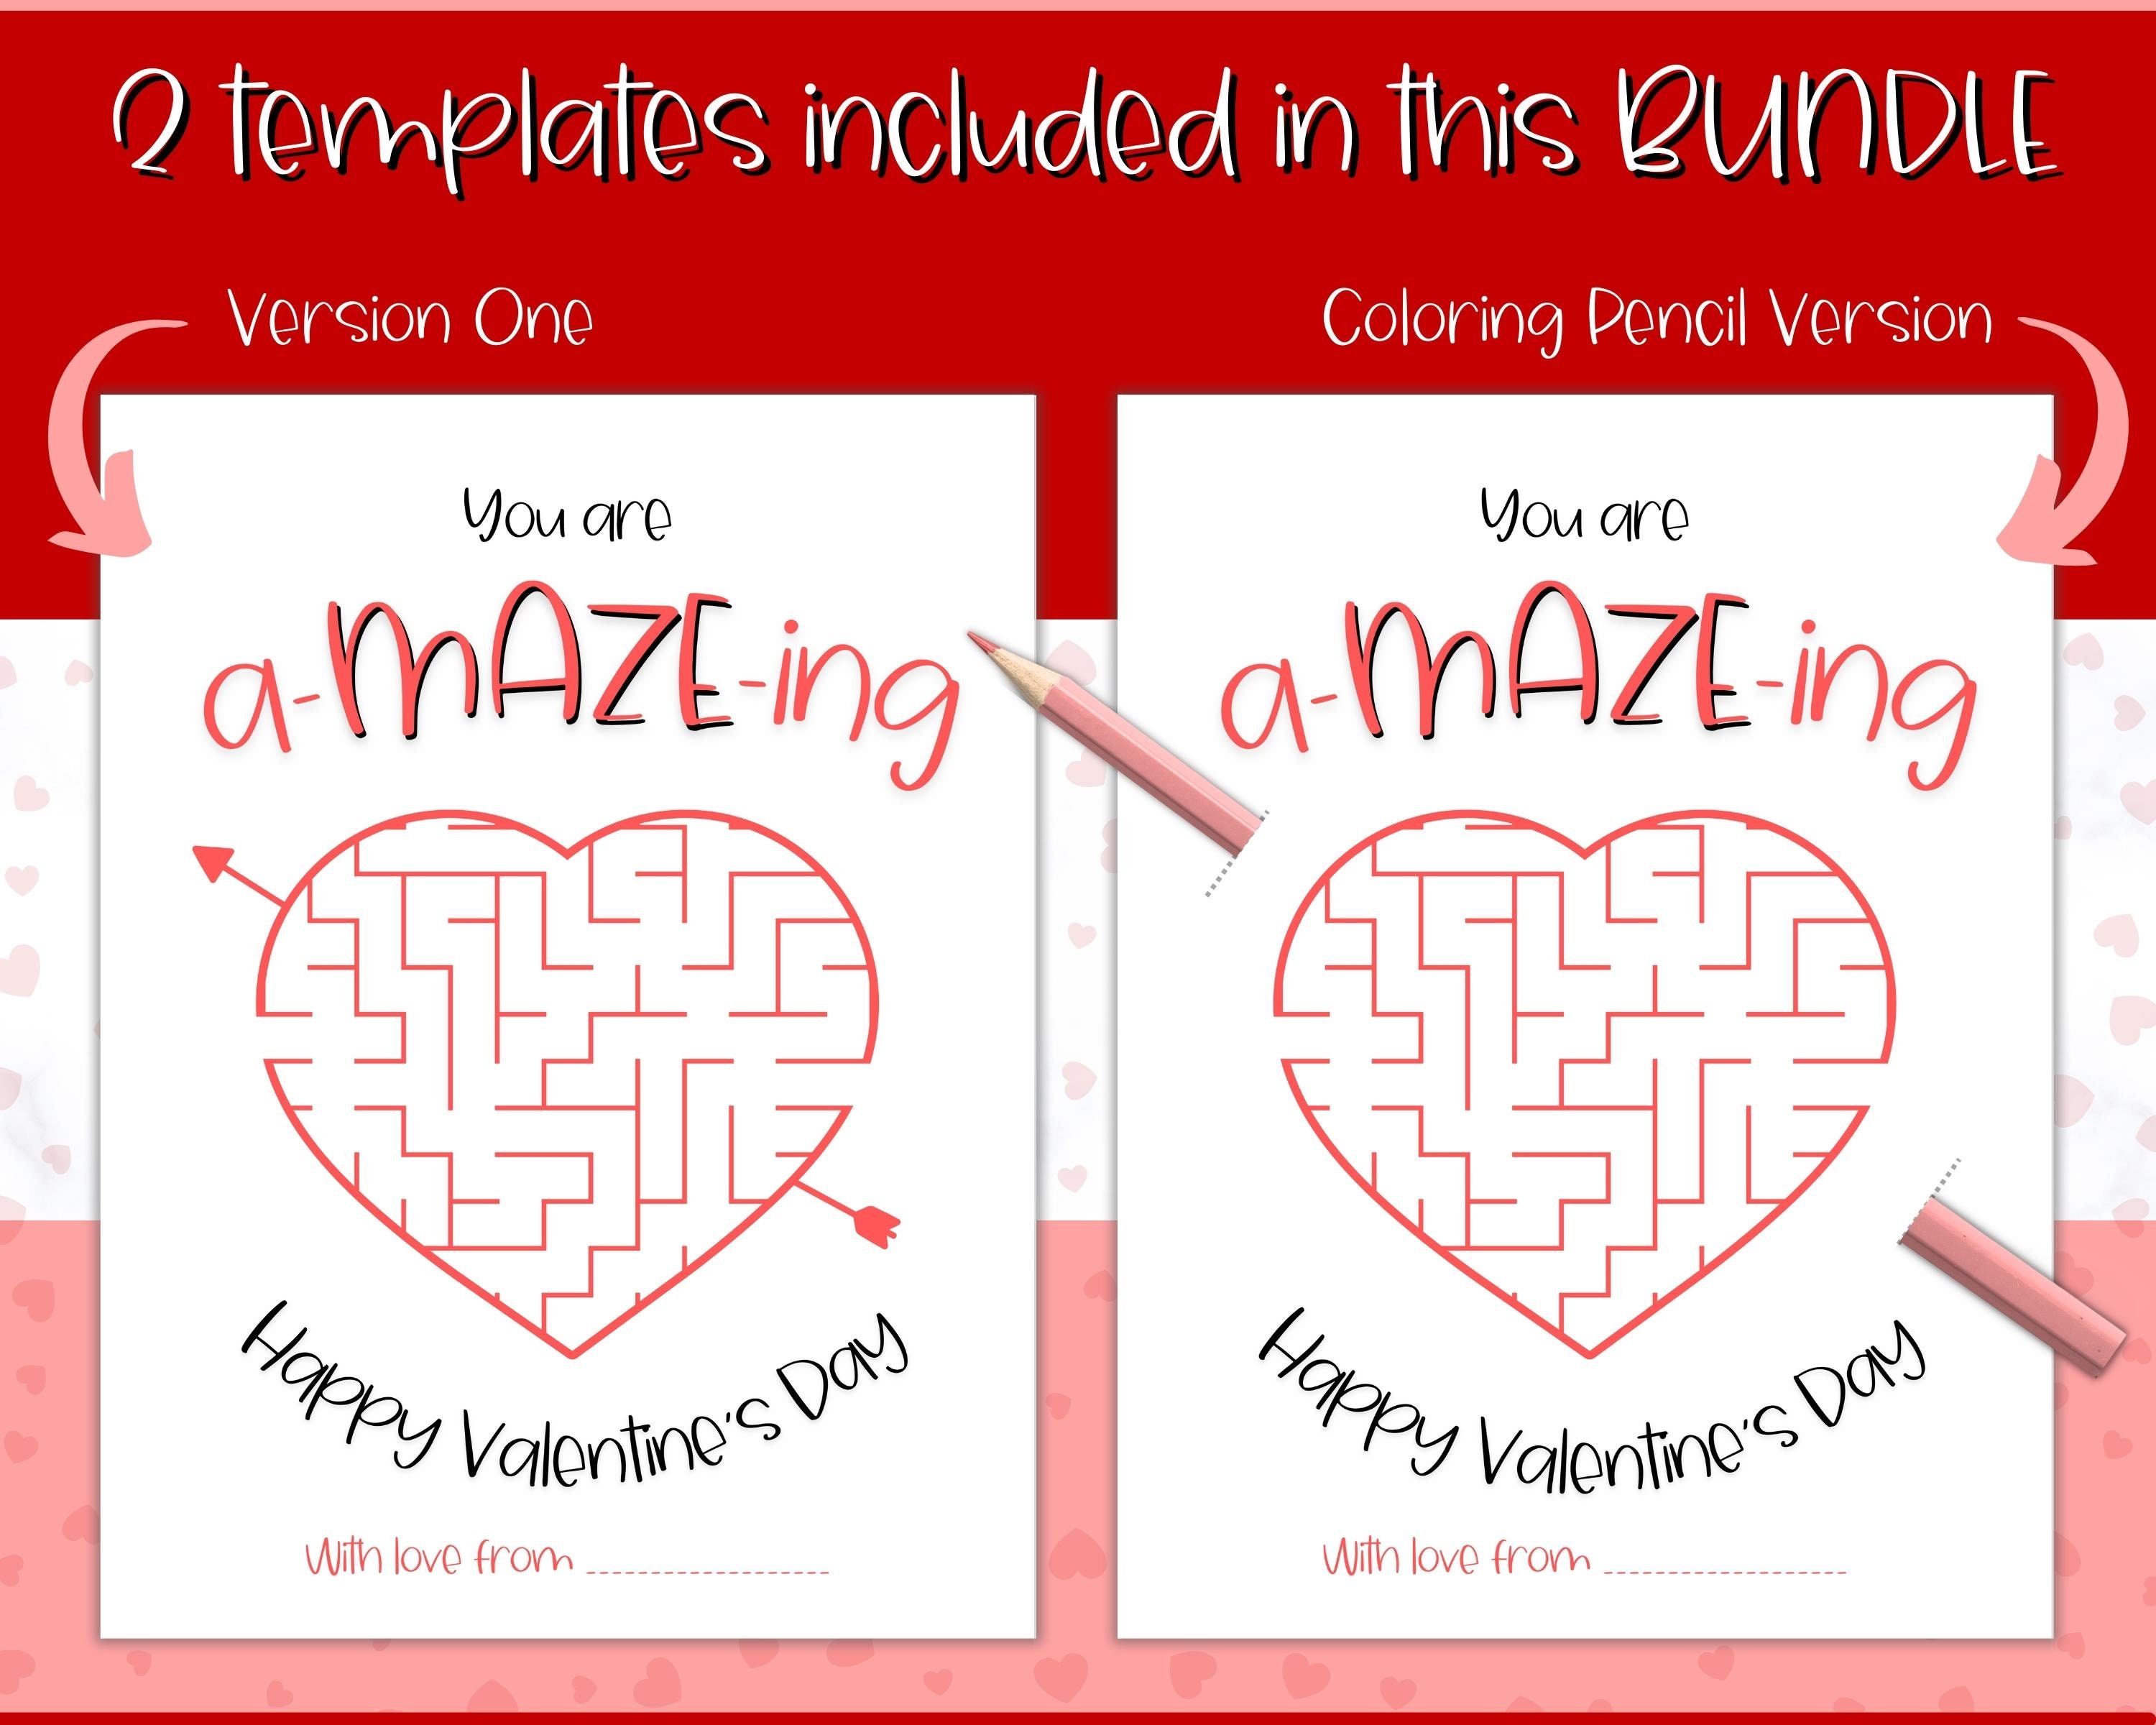 Pencil Valentine Card for Kids, You are A-MAZE-Zing, Comic